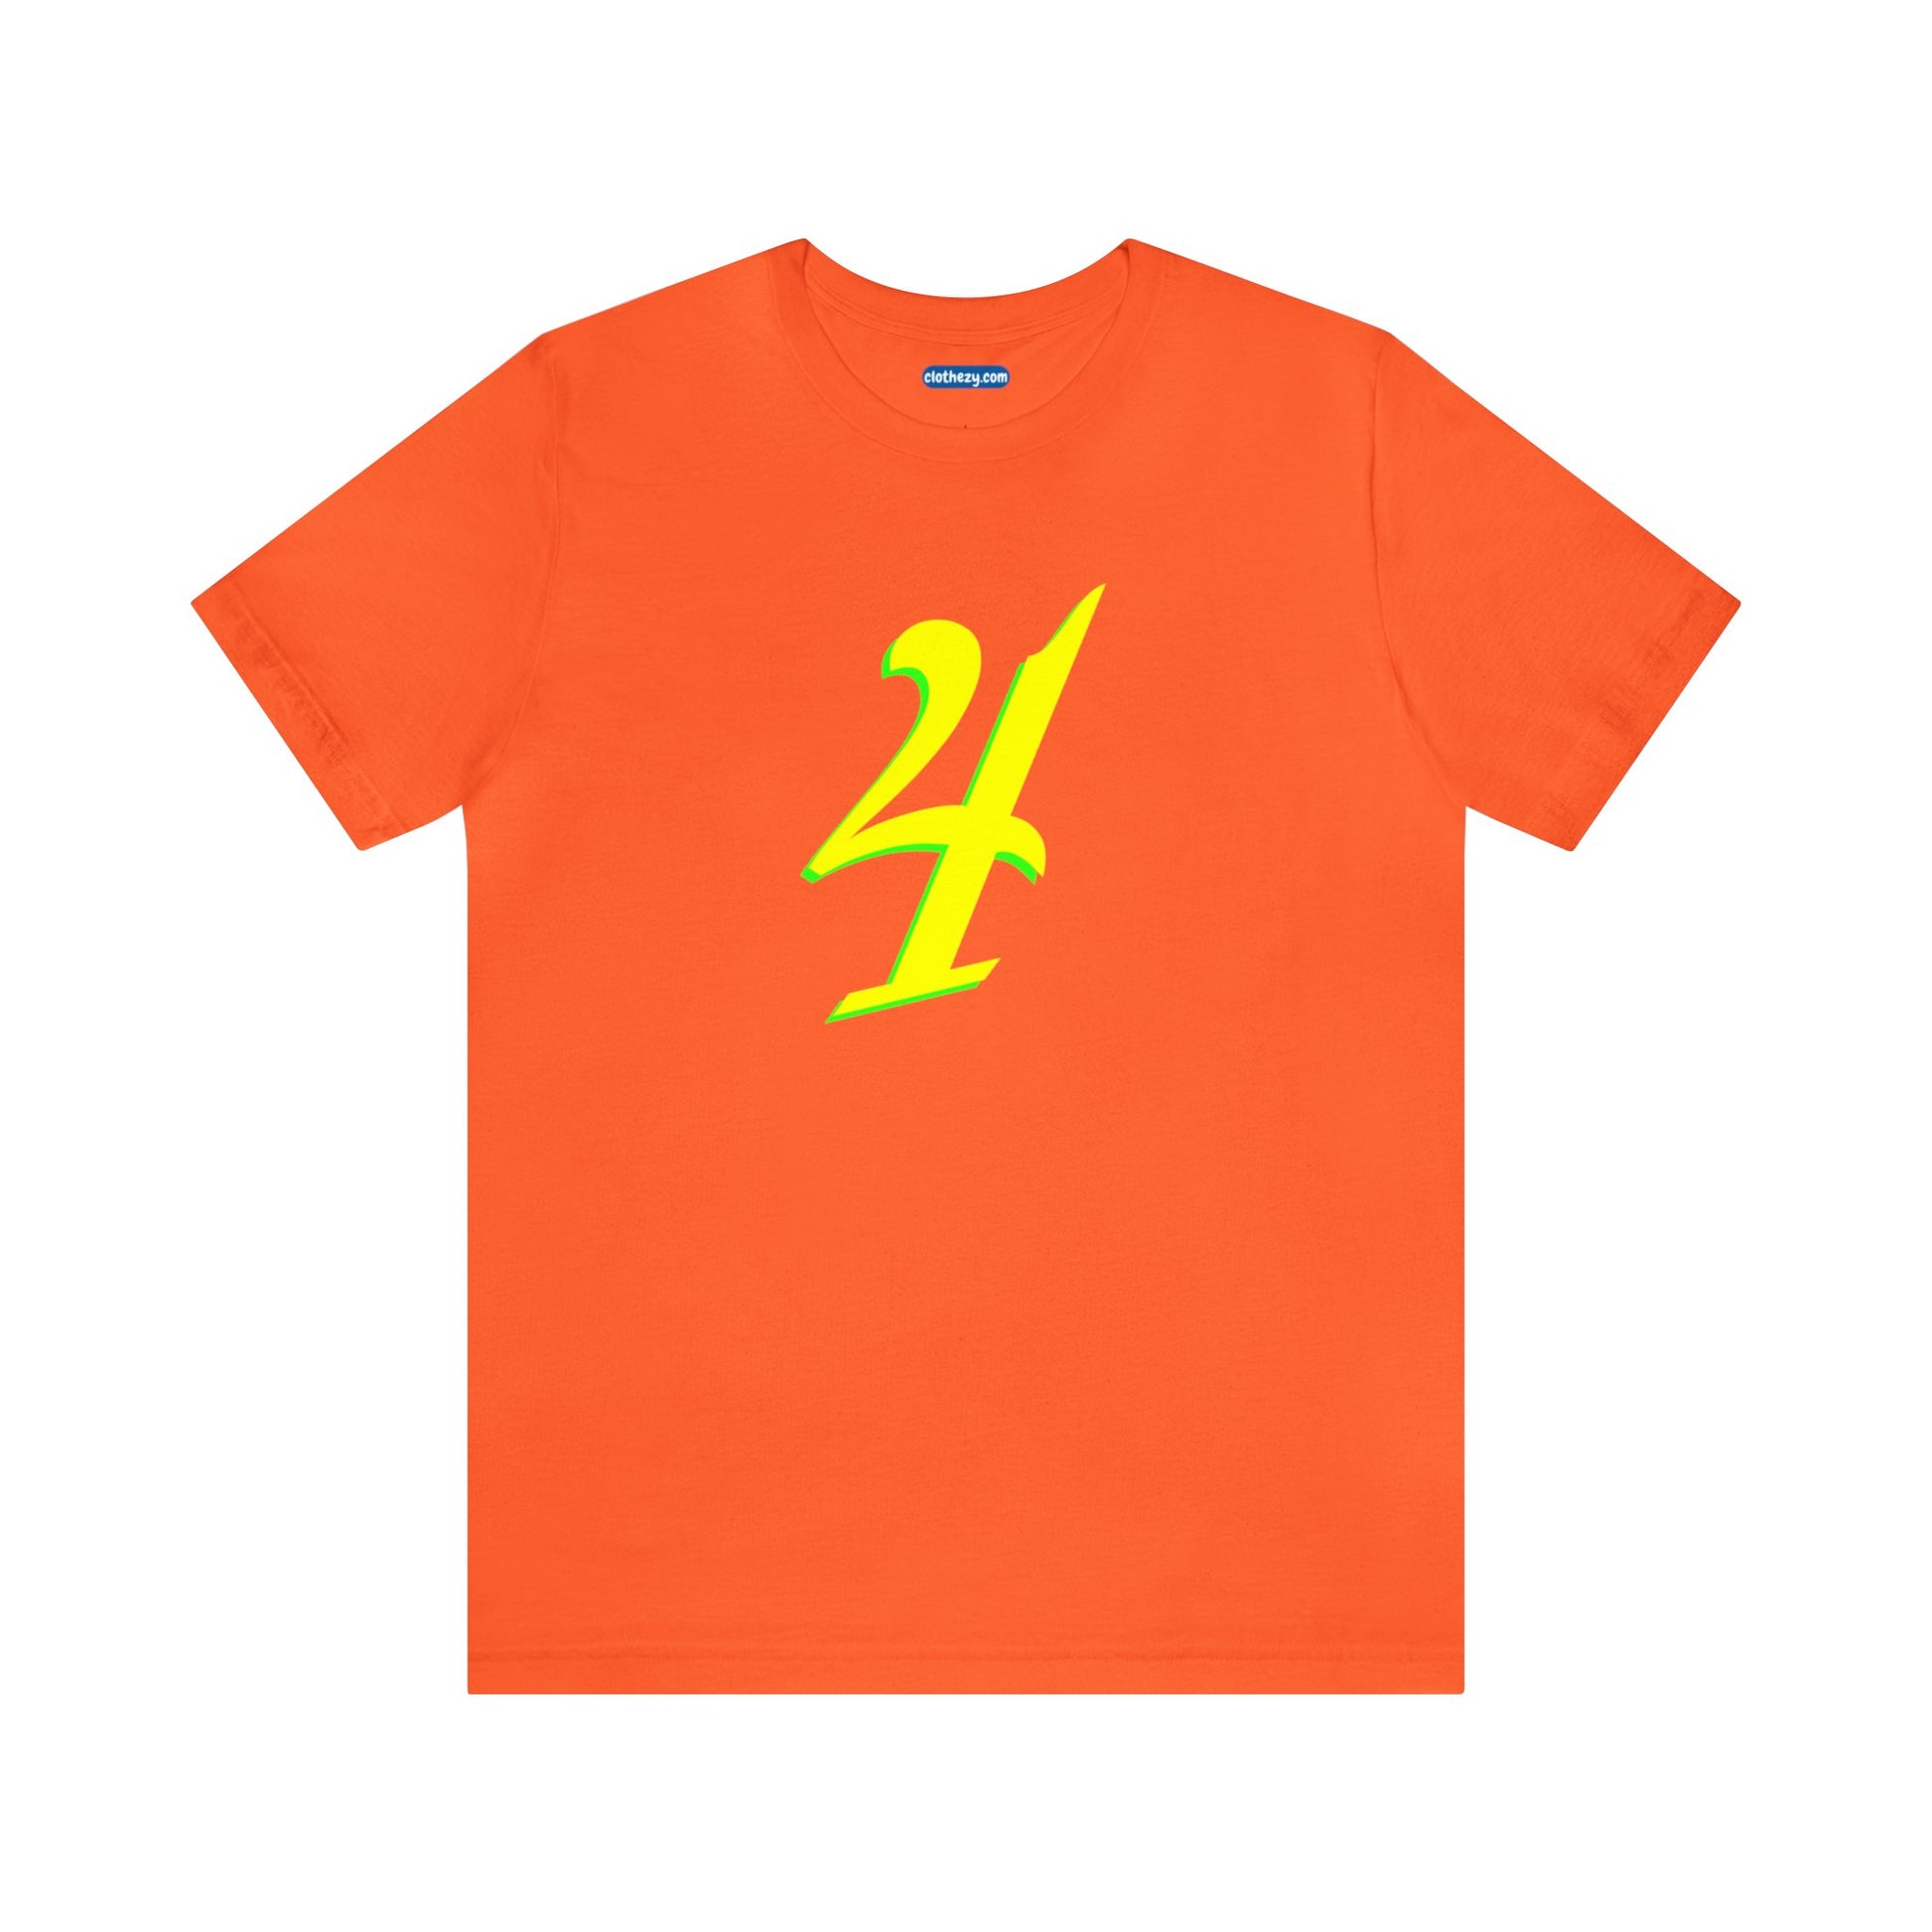 Number 4 Design - Soft Cotton Tee for birthdays and celebrations, Gift for friends and family, Multiple Options by clothezy.com in Orange Size Small - Buy Now